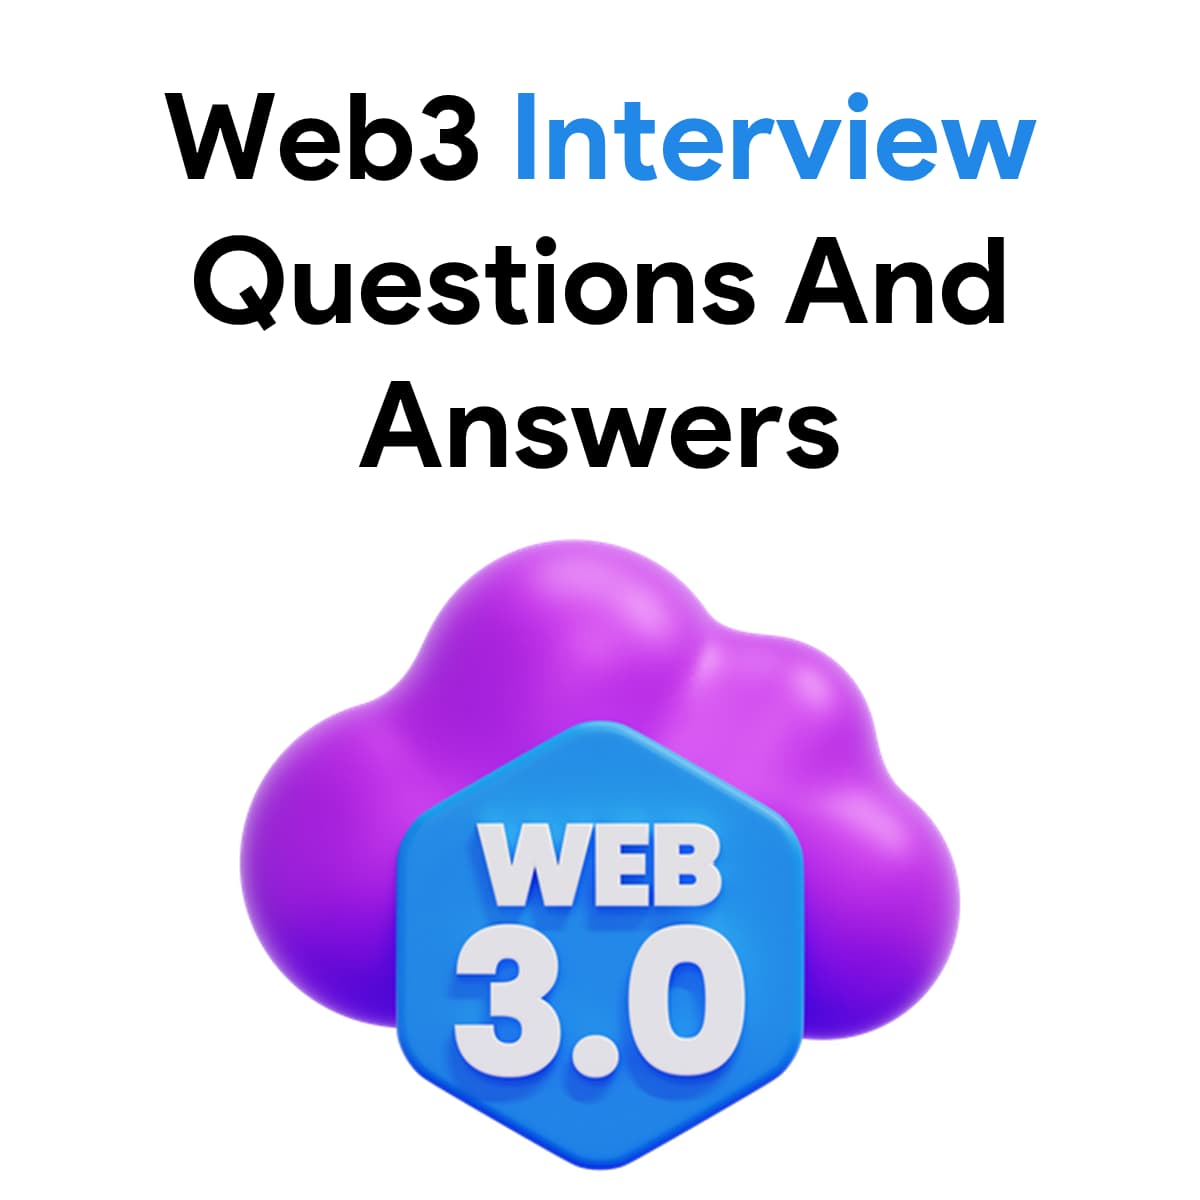 Web3 Interview questions and answers